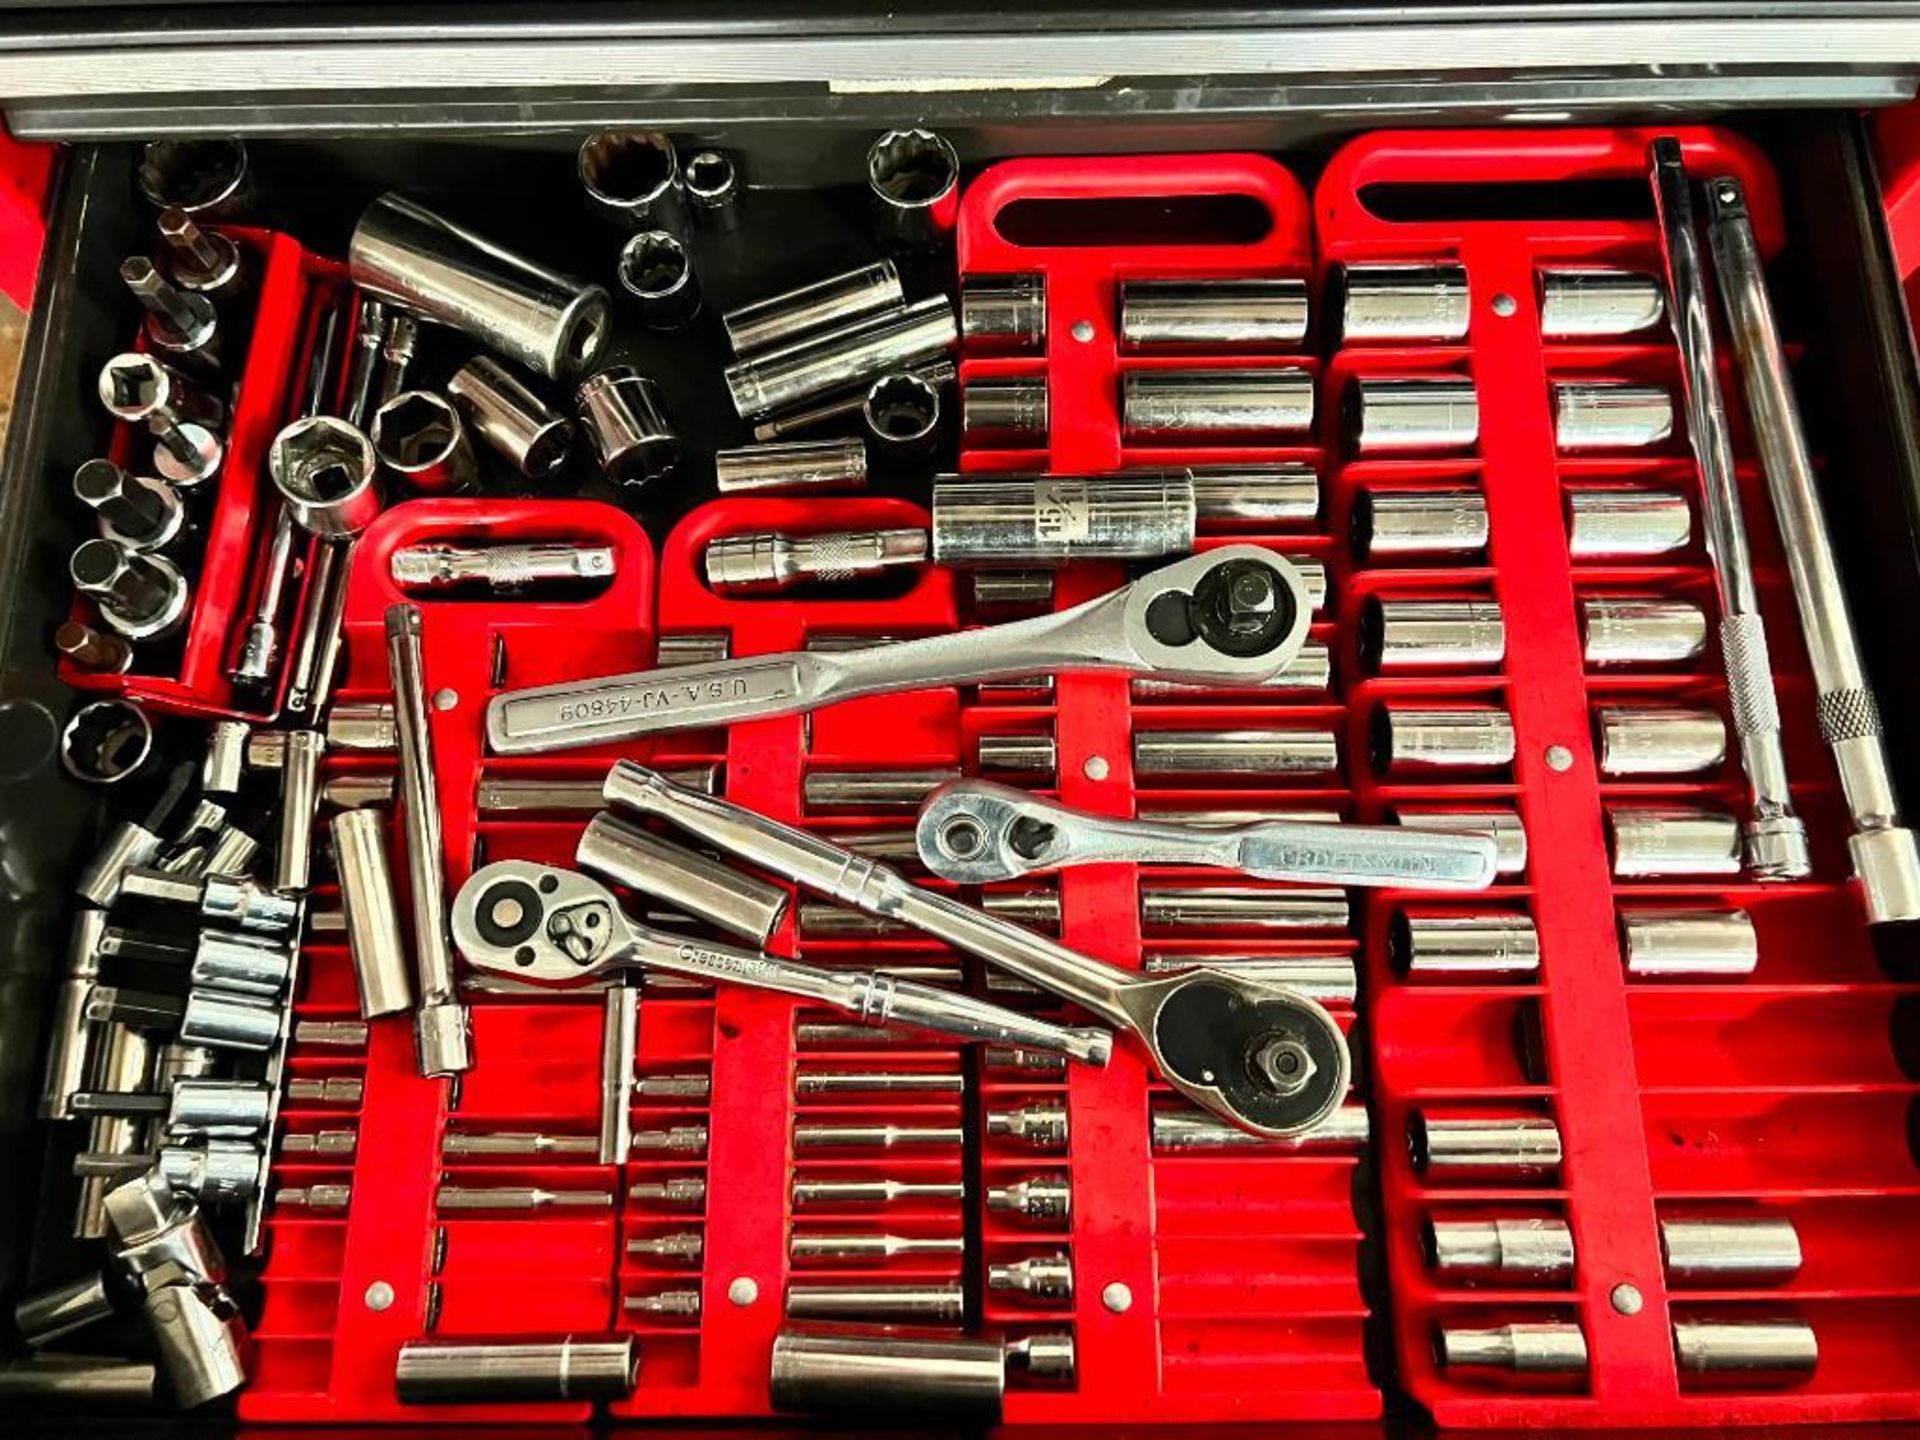 Craftsman 11-Drawer Rolling Toolbox w/ Content of Assorted Tools - Image 6 of 10